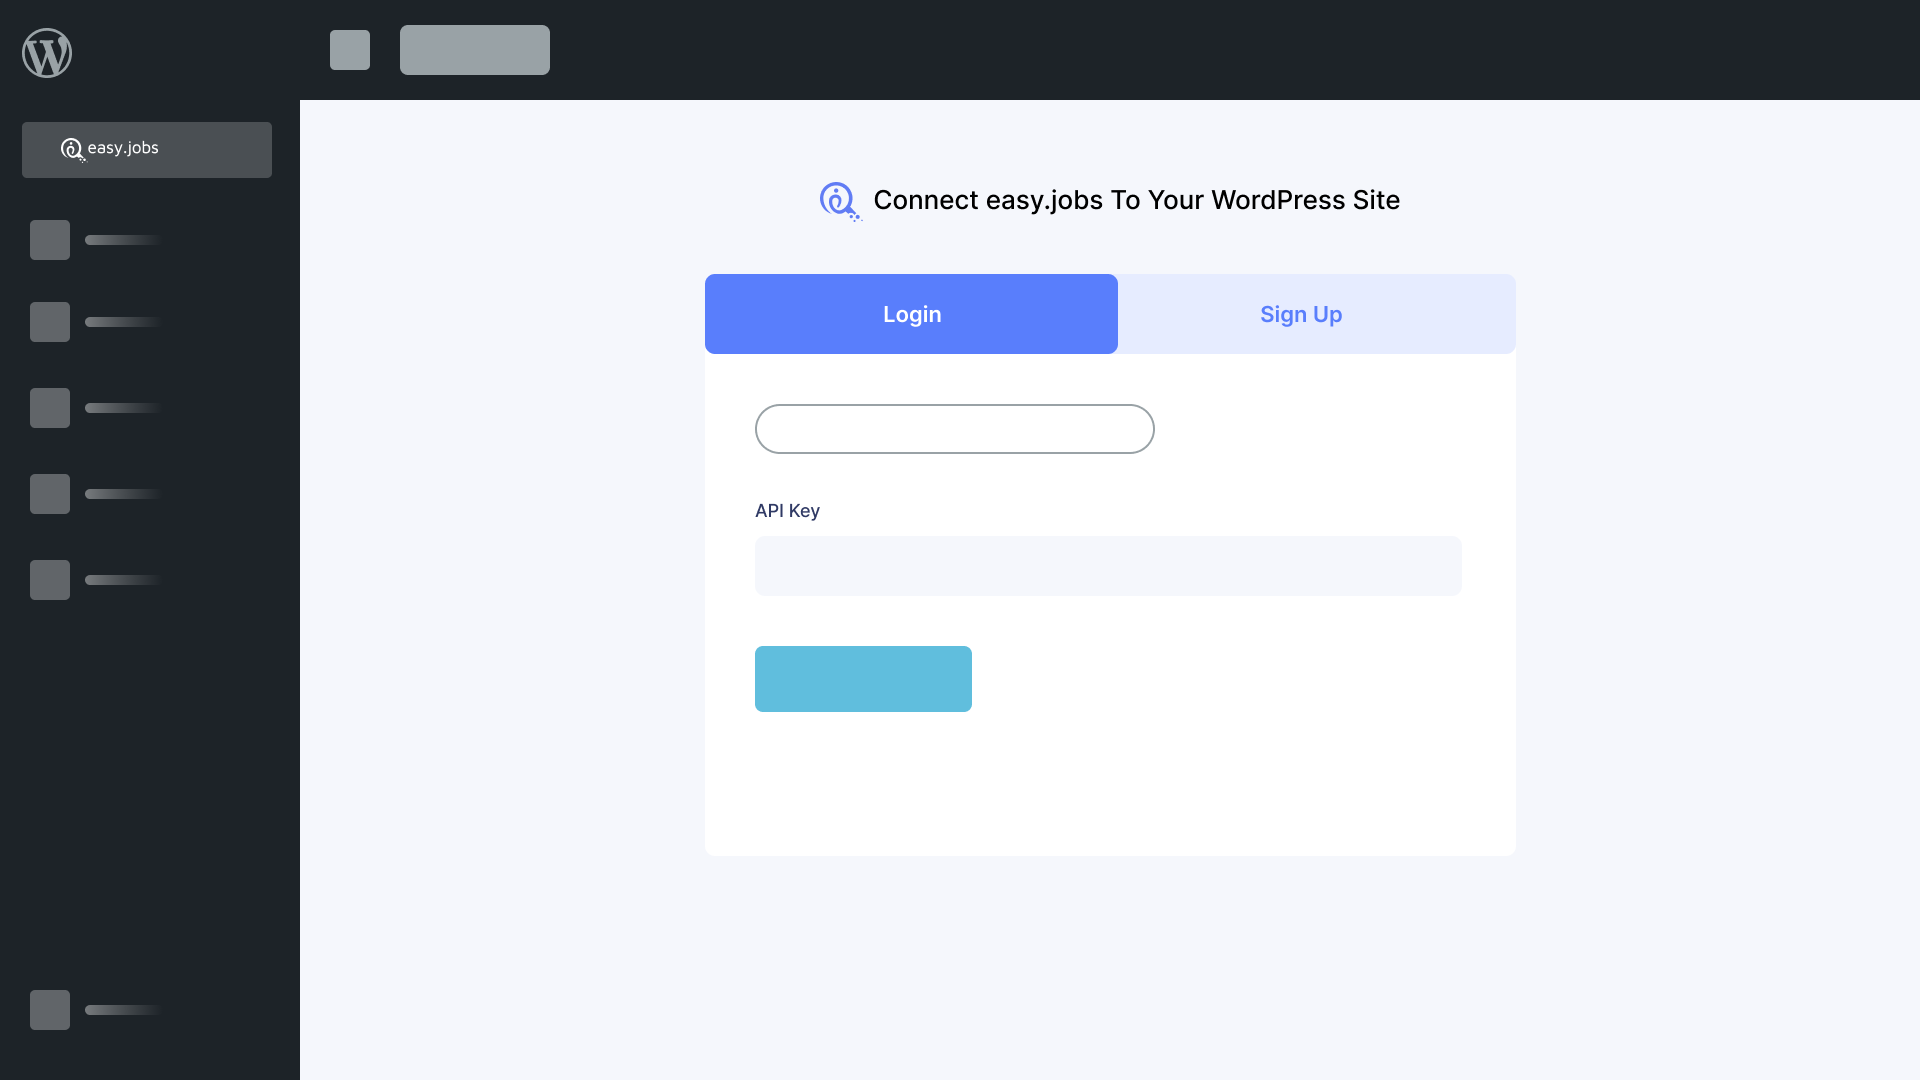 easy.jobs comes with a WordPress plugin that allows you to directly connect your SaaS account to your website in just a few clicks, using credentials or API keys. You will be able to get all the features and functionalities of the SaaS on the plugin.